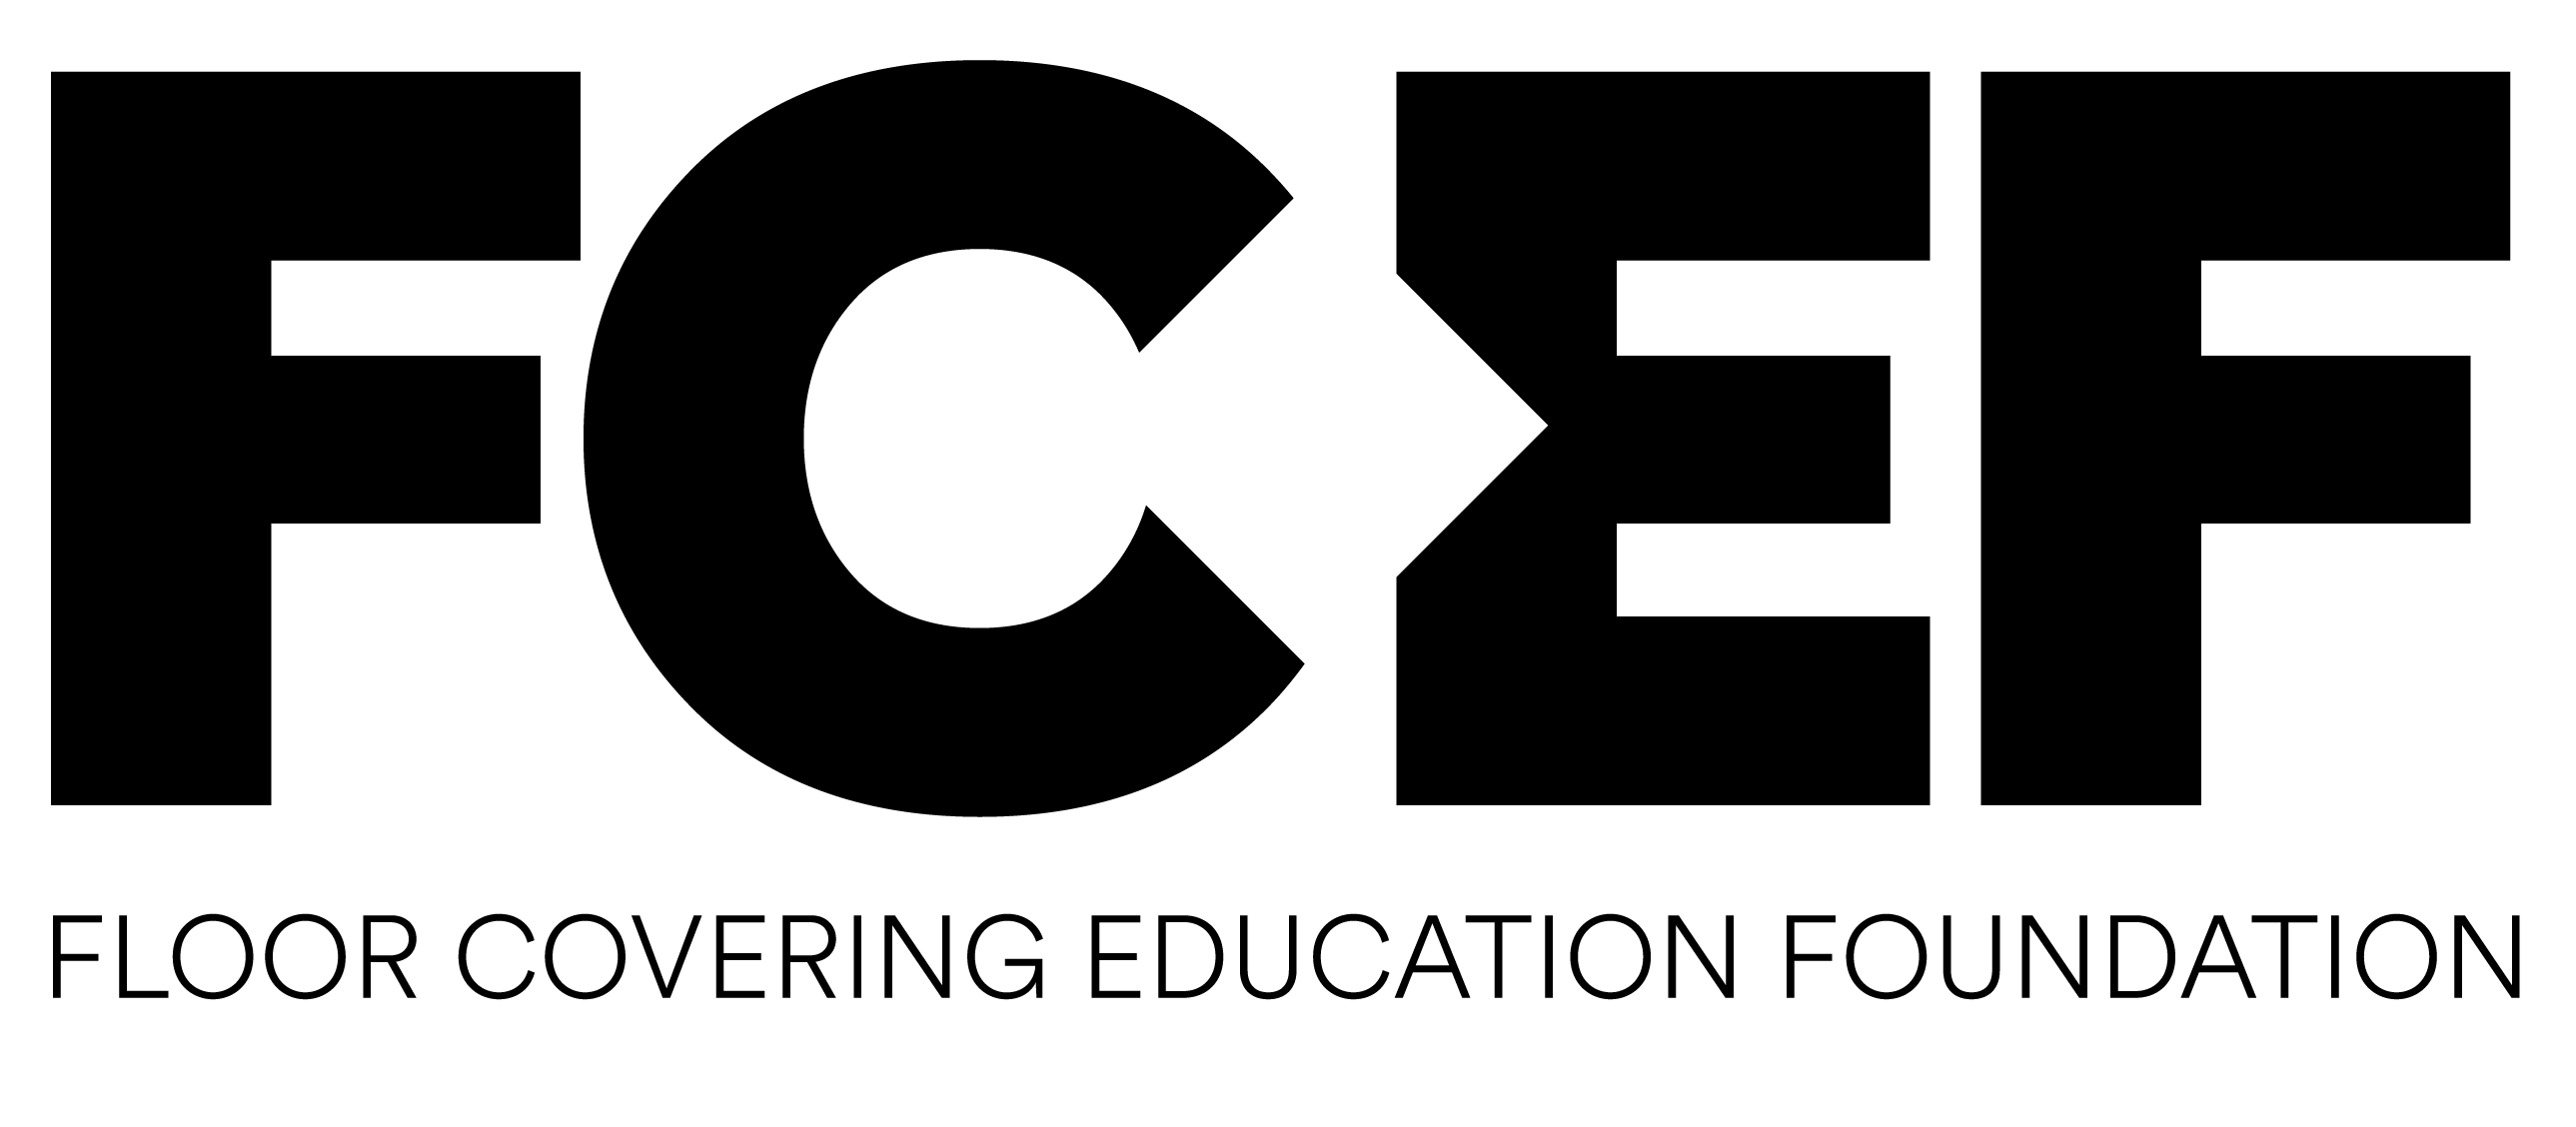 Floor Covering Education Foundation | National Floorcovering Alliance